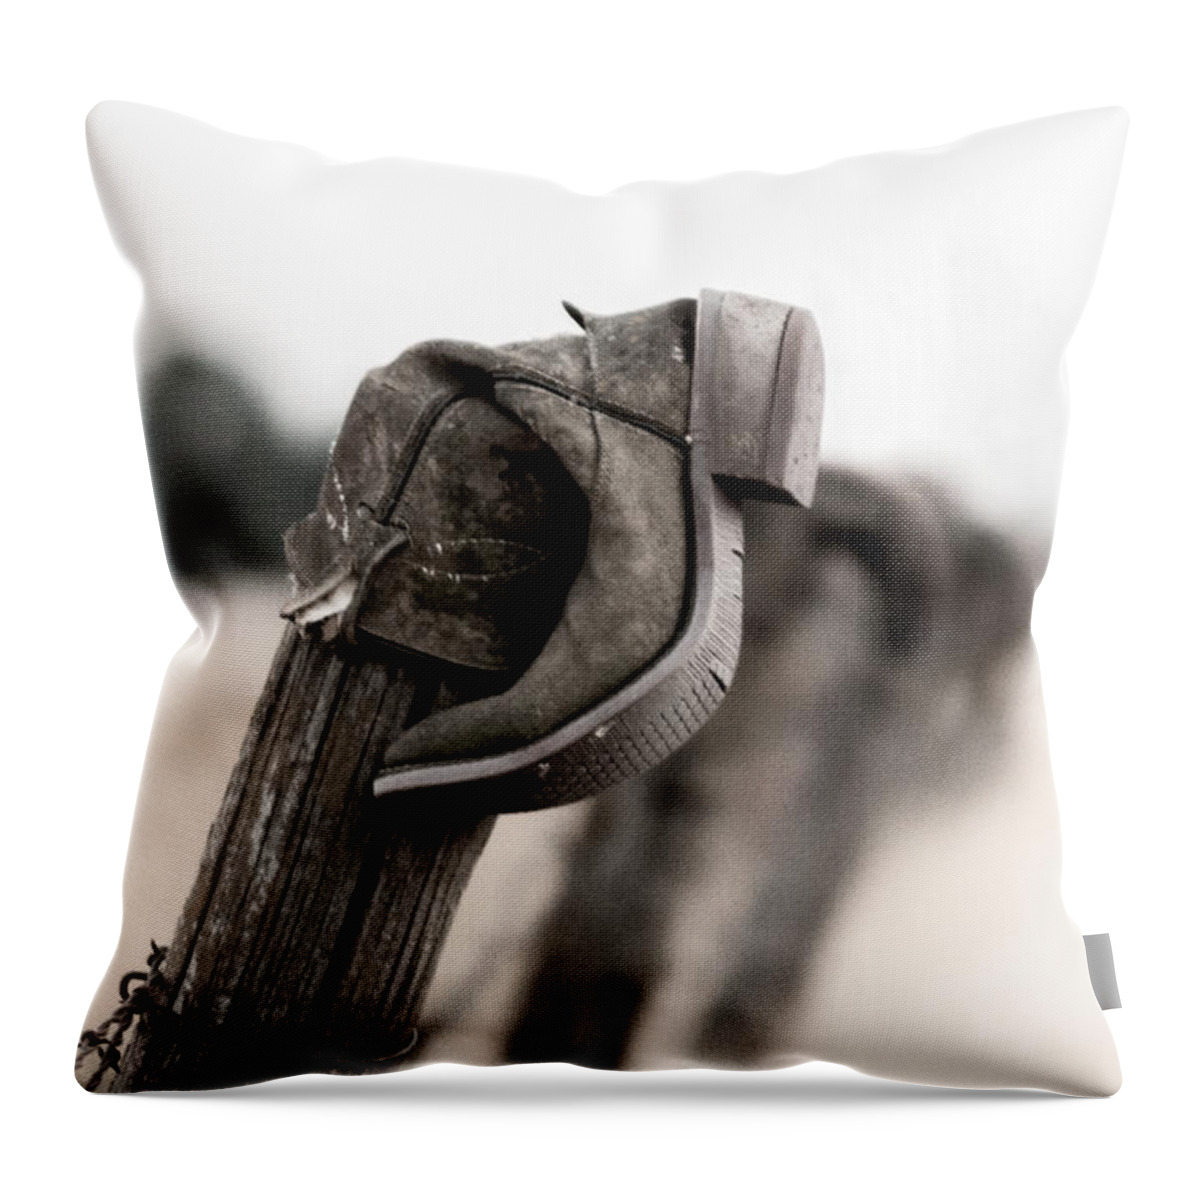 Jay Stockhaus Throw Pillow featuring the photograph Boot 5 by Jay Stockhaus